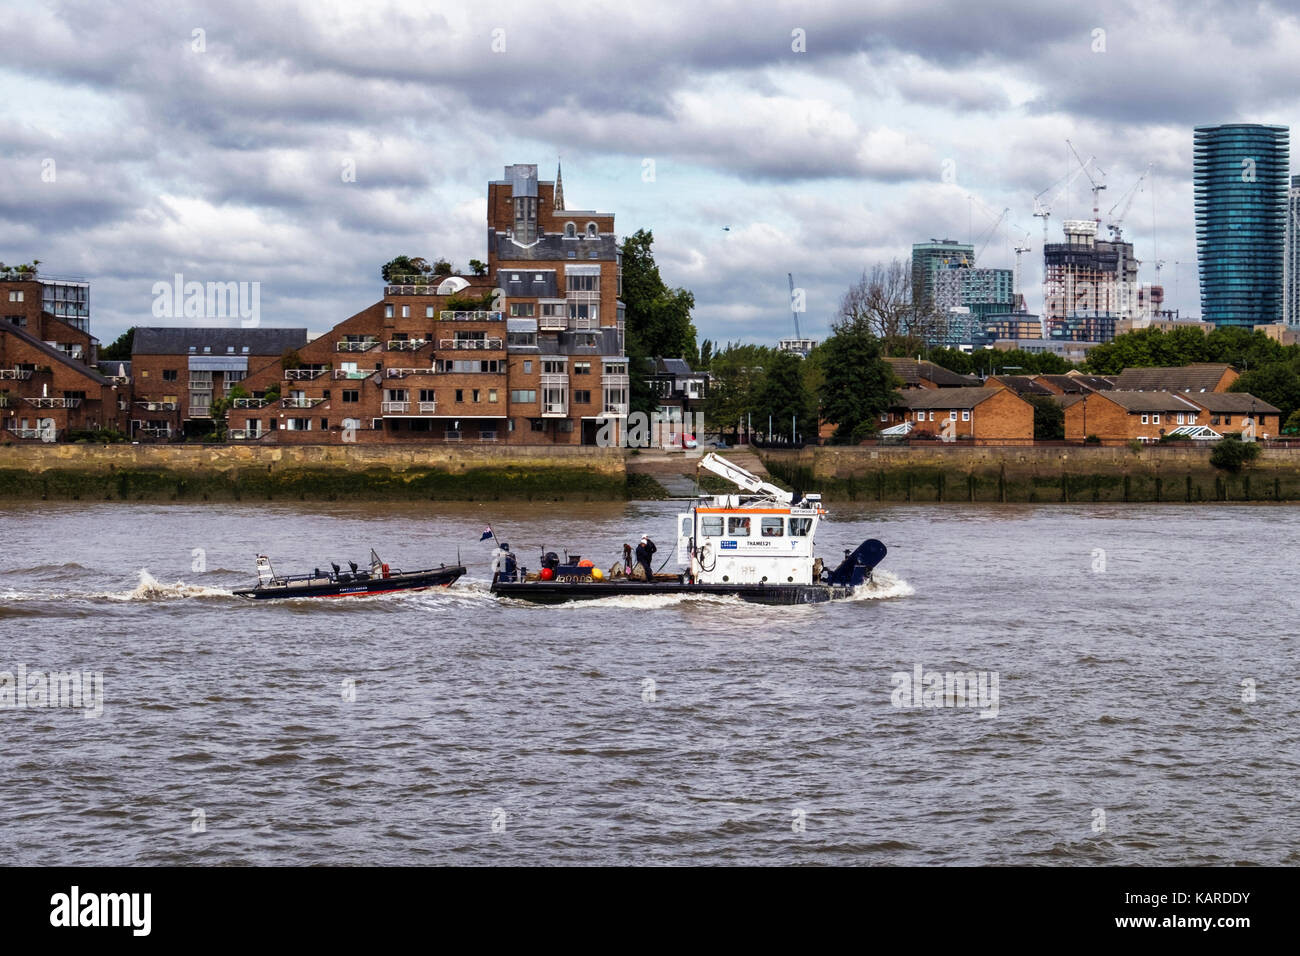 Thames river view with tug boat on choppy water and new and old apartment buildings on bank of river Stock Photo